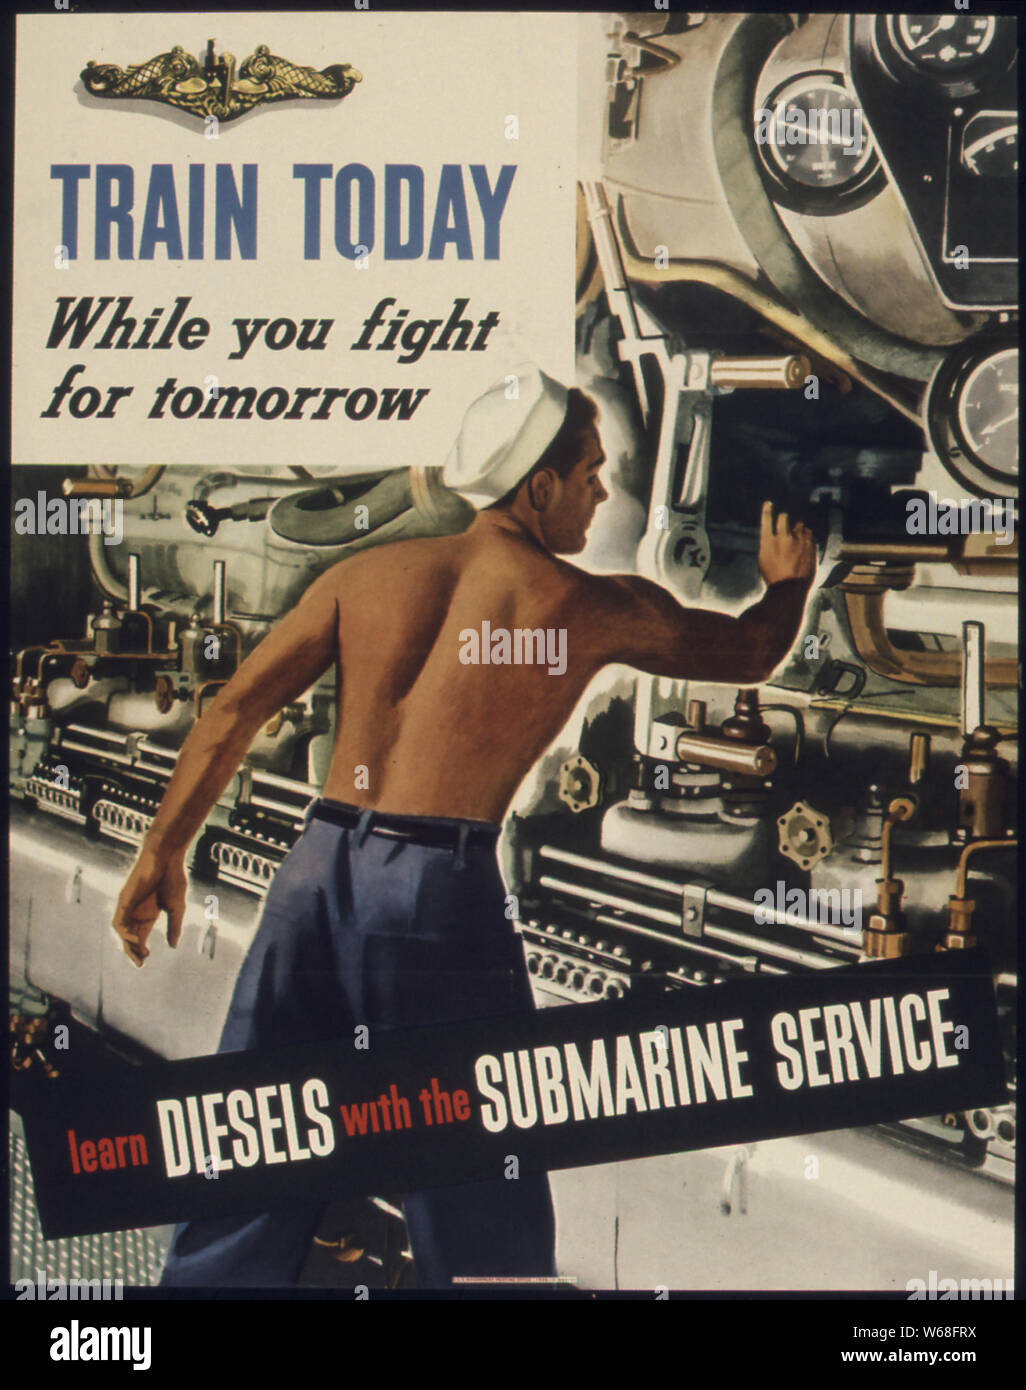 TRAIN TODAY WHILE YOU FIGHT FOR TOMORROW - LEARN DIESELS WITH THE SUBMARINE SERVICE. Stock Photo